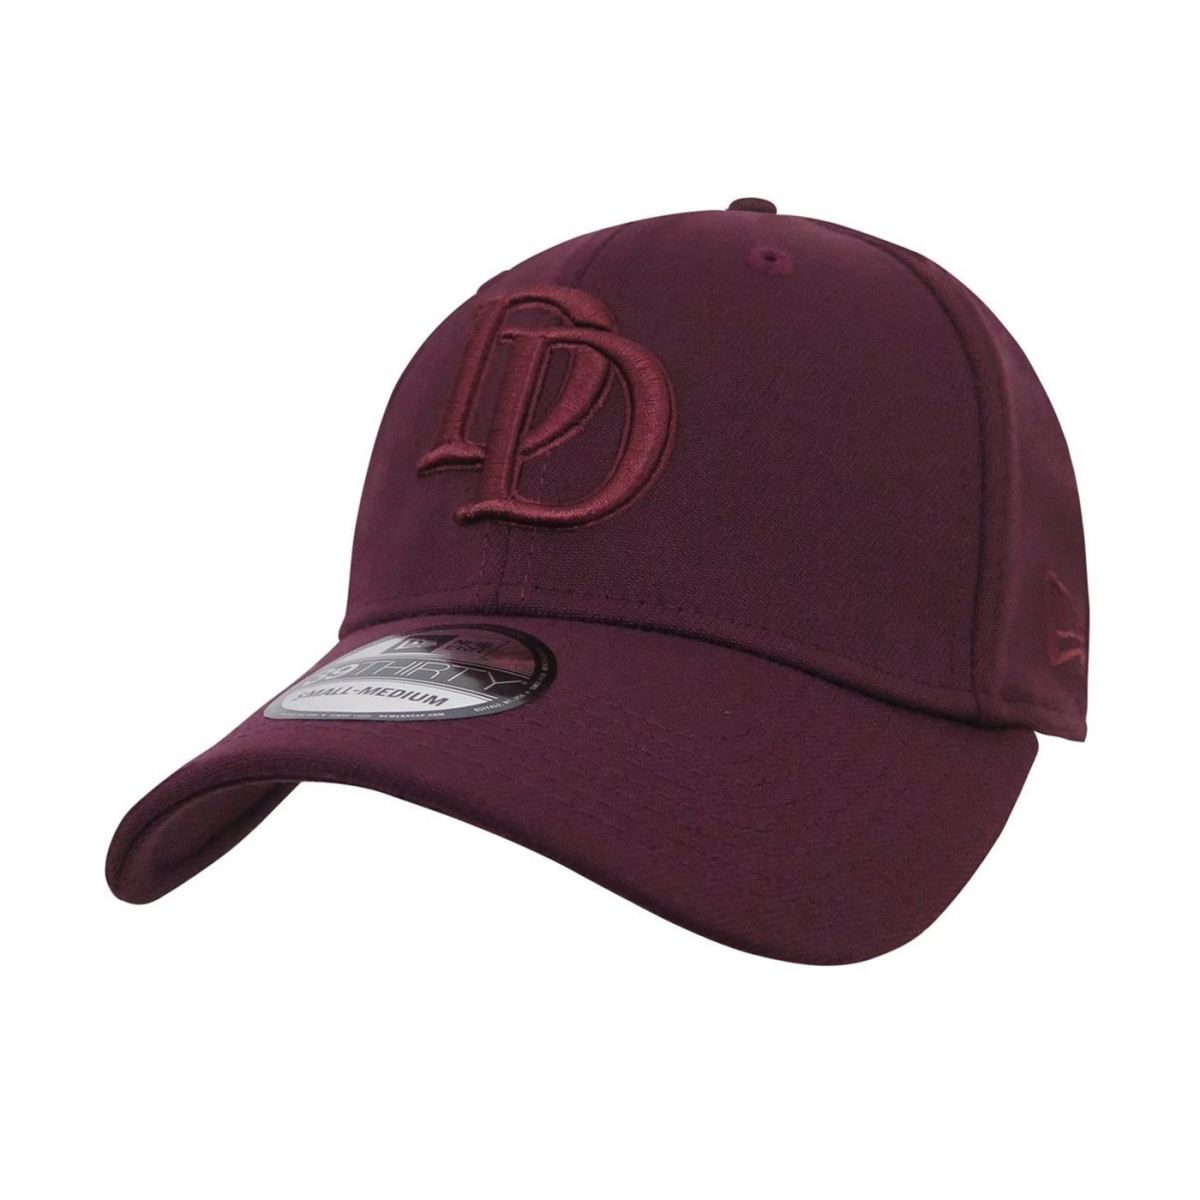 Picture of Dare Devil capdd3930-l-x-Large-XLarge Dare Devil Daredevil Symbol 39 Thirty Fitted Hat - Large & Extra Large